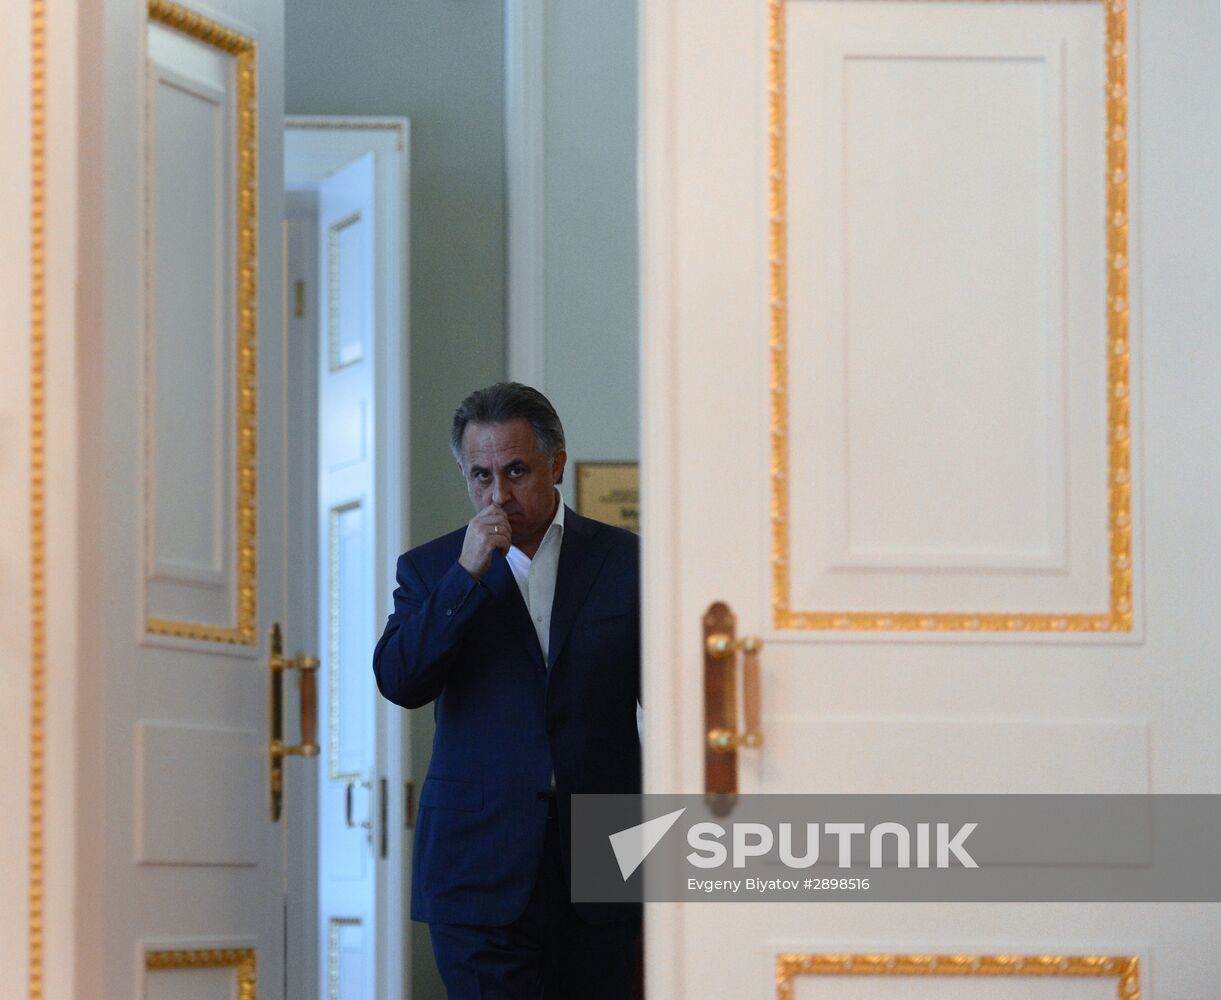 News conference by Russian Minister of Sport Vitaly Mutko